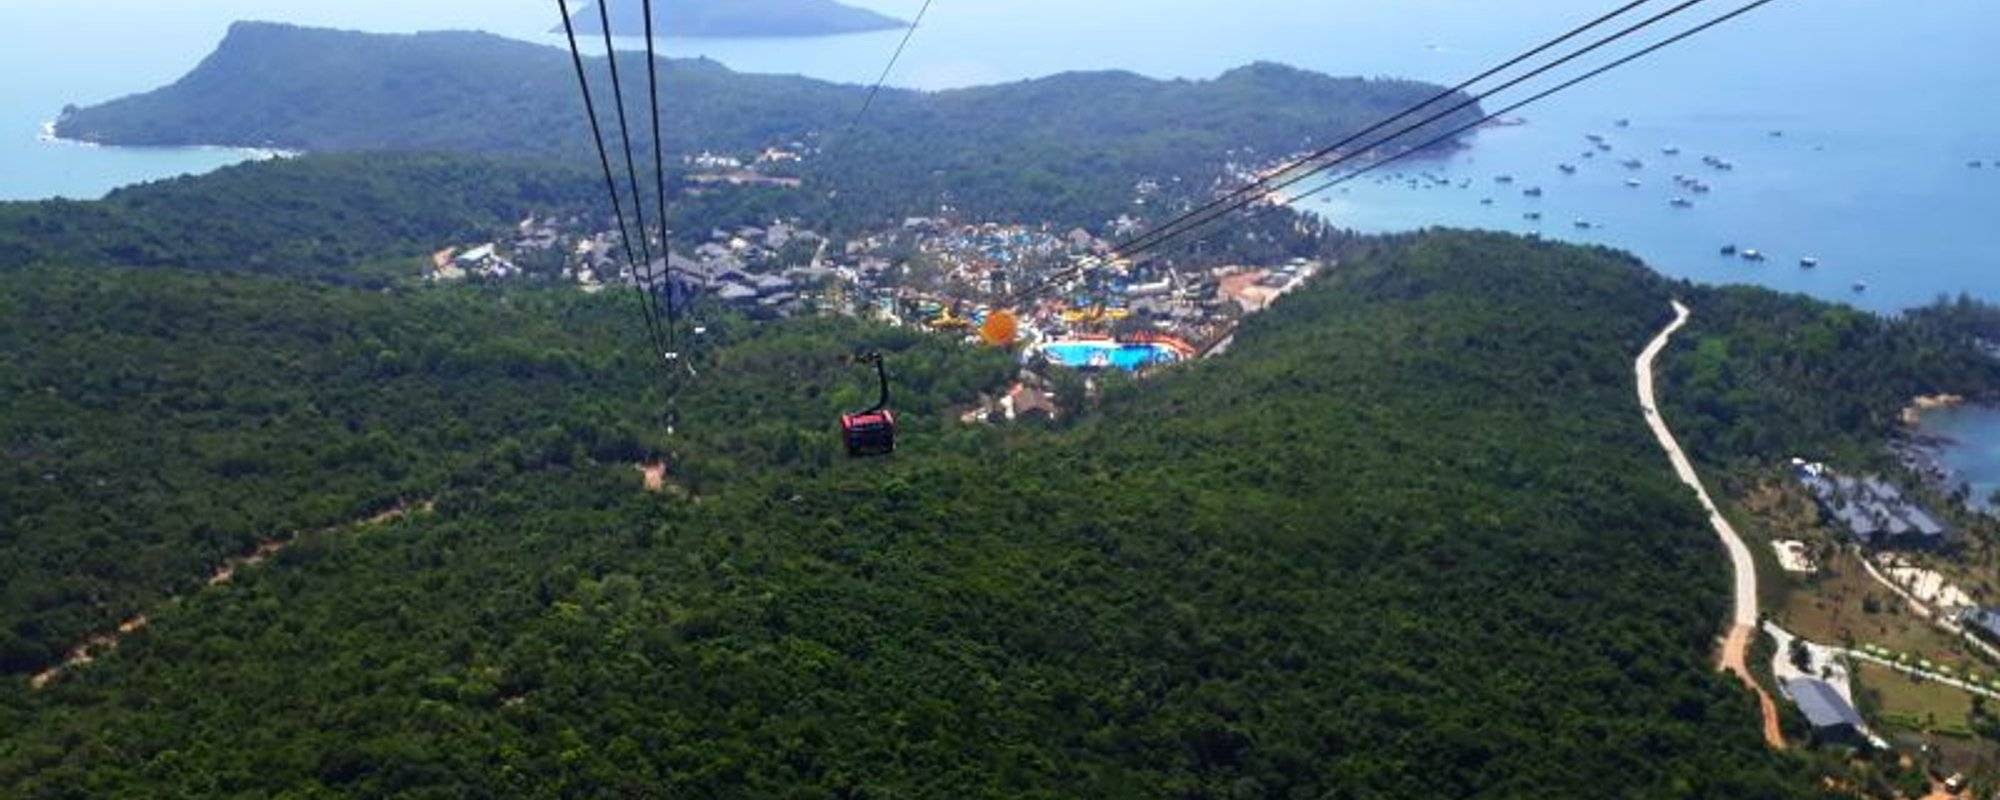 Travel Pro Places of Interest #174: The Cable Cars in Phu Quoc Vietnam! Final Part Two (8 Photos)